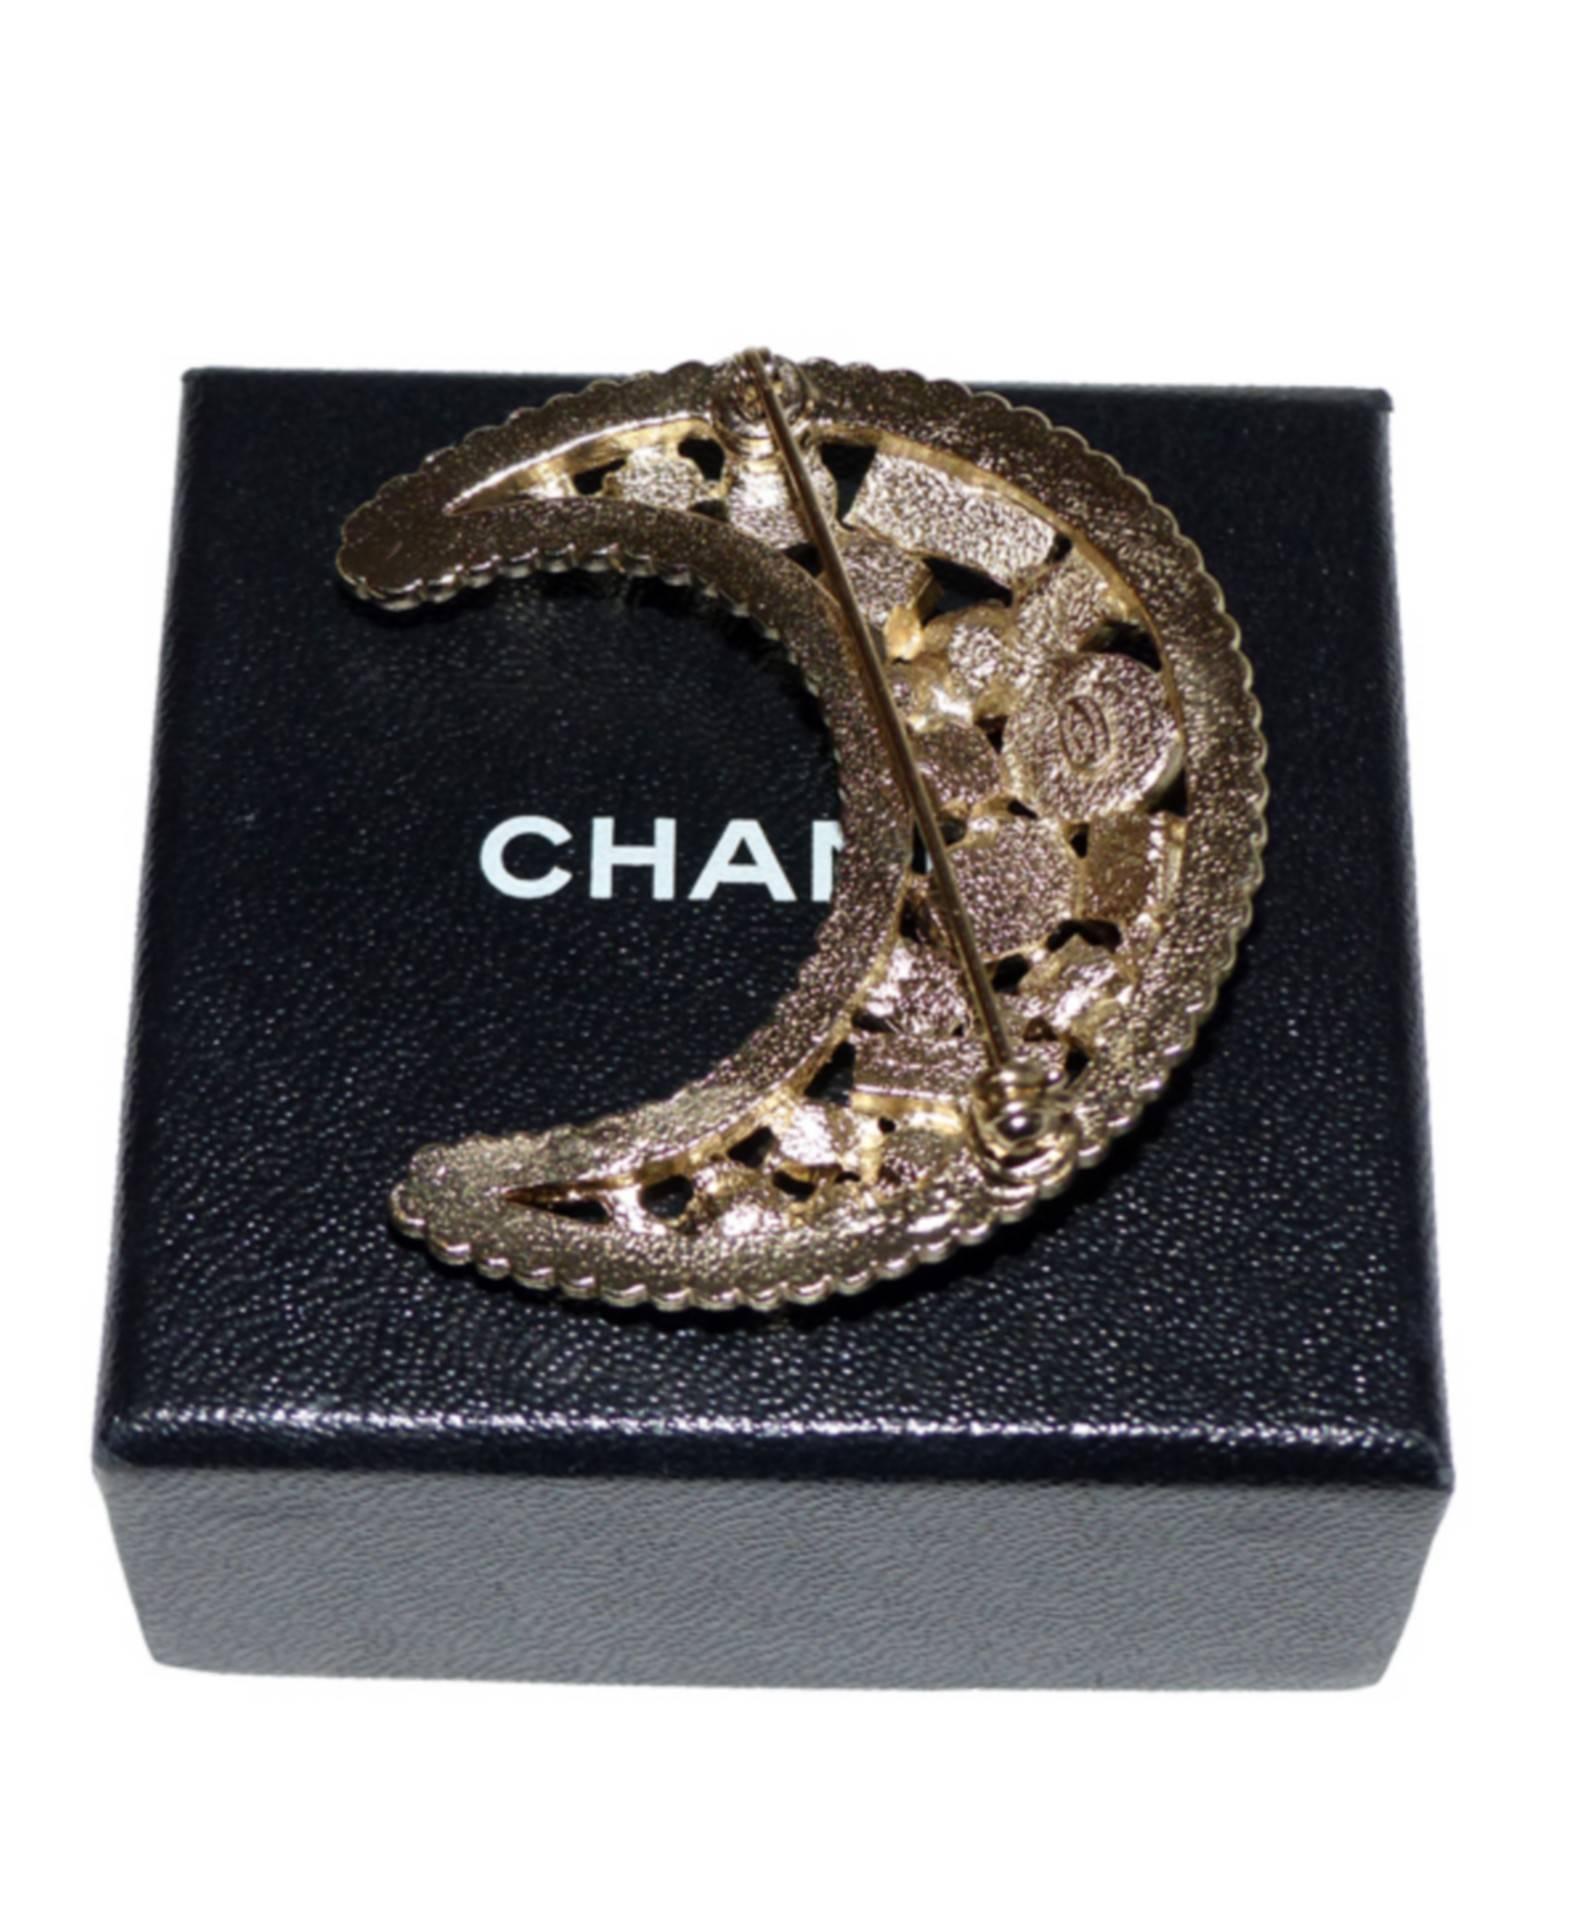 Stunning chanel moon metal brooch.
Set with red, blue, violet and turquoise stones.
Contours in fine pearls.
Signature on the back
Comes with box and bag Chanel
Dimensions : 
Width - Width: 5.5 cm / 2.15 